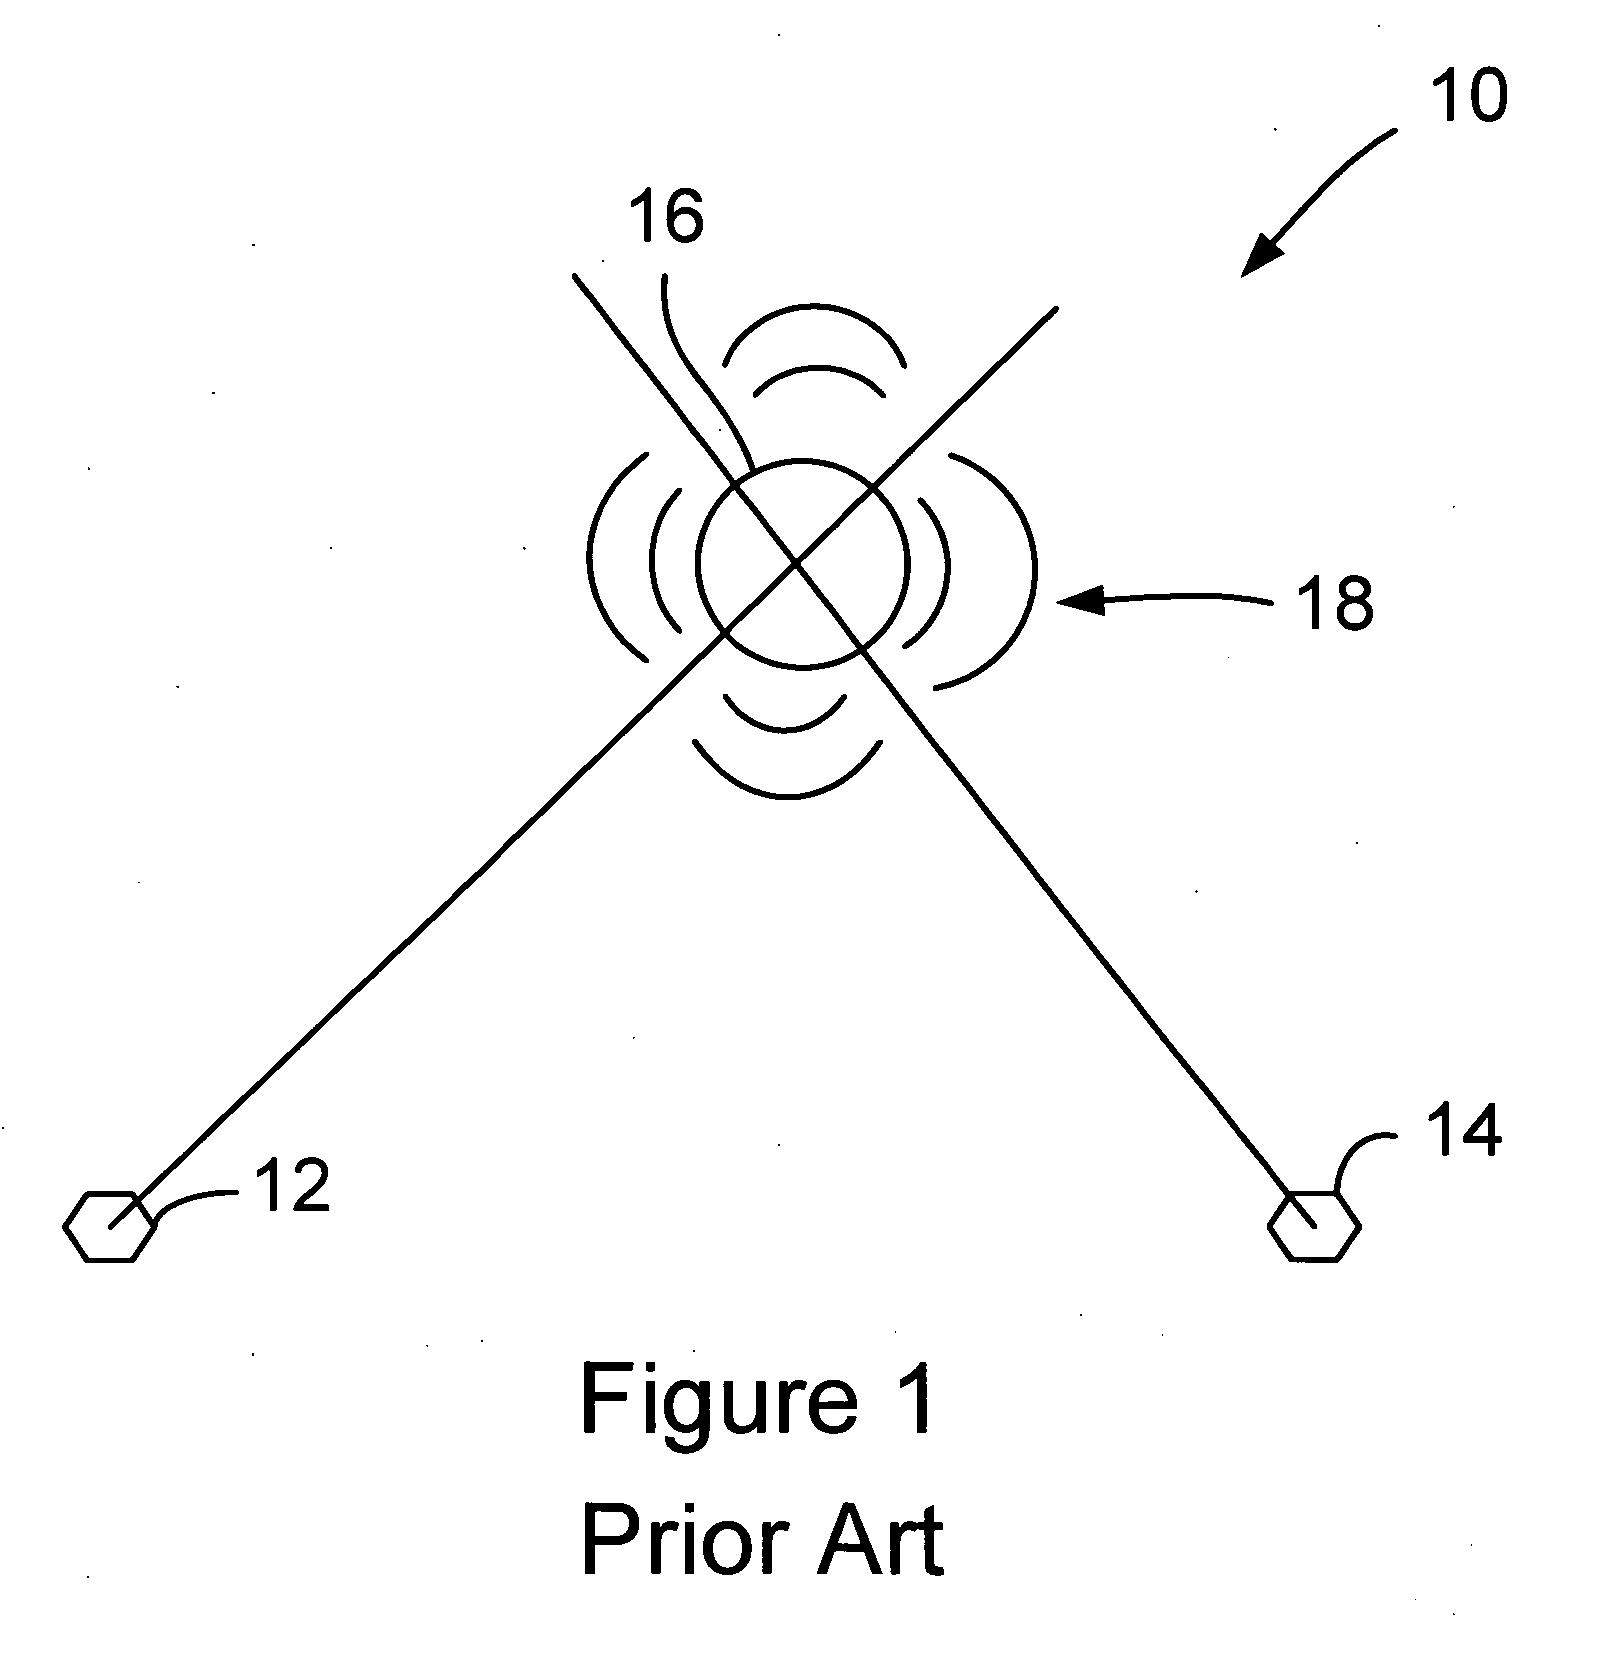 Method and system of providing clustered networks of bearing-measuring sensors